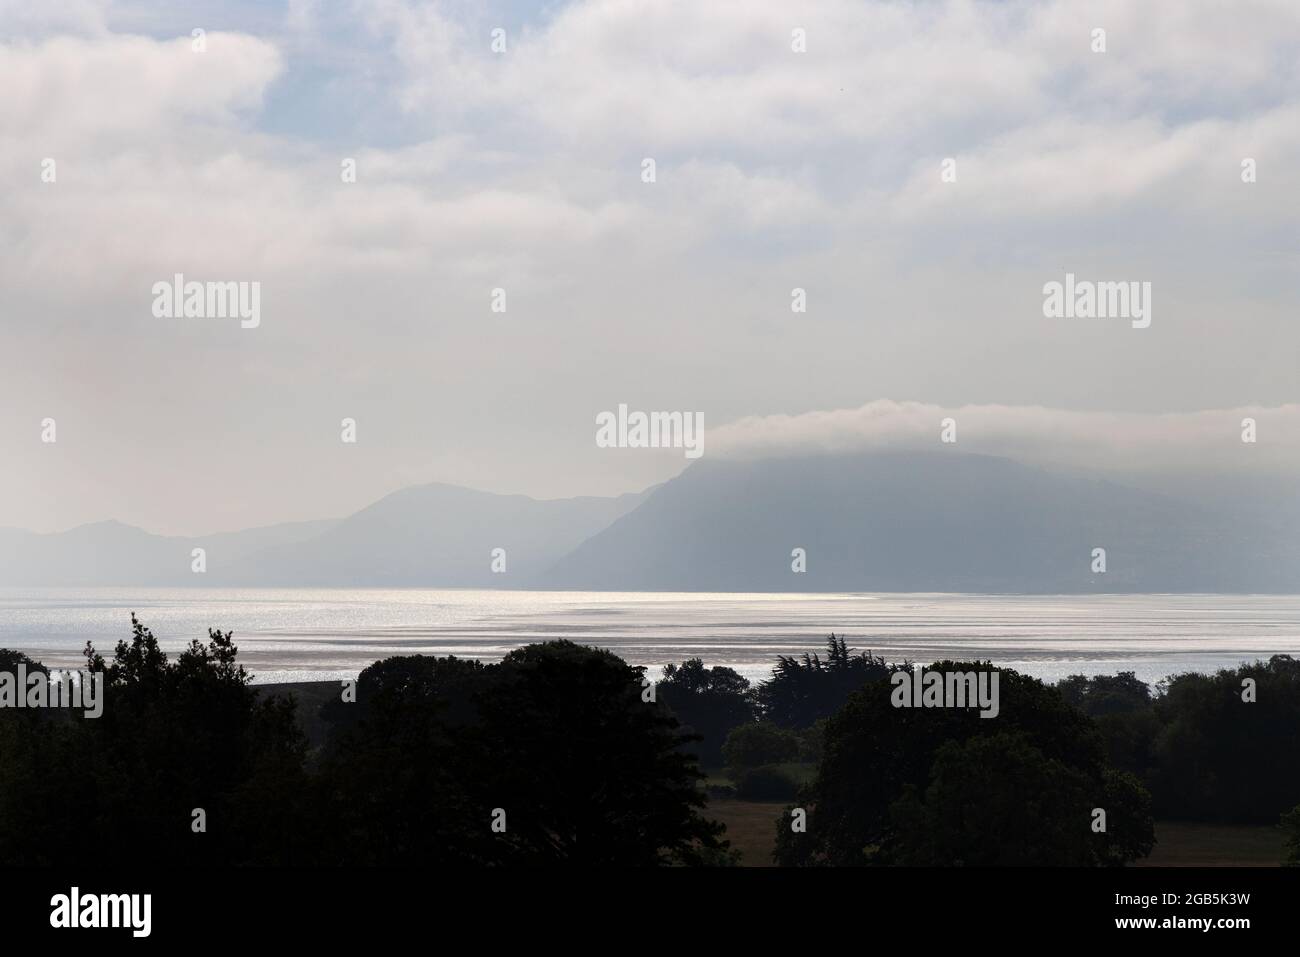 Wales landscape; Misty morning view from Anglesey across the Menai Strait to mainland Wales; Anglesey, Wales Britain UK Stock Photo